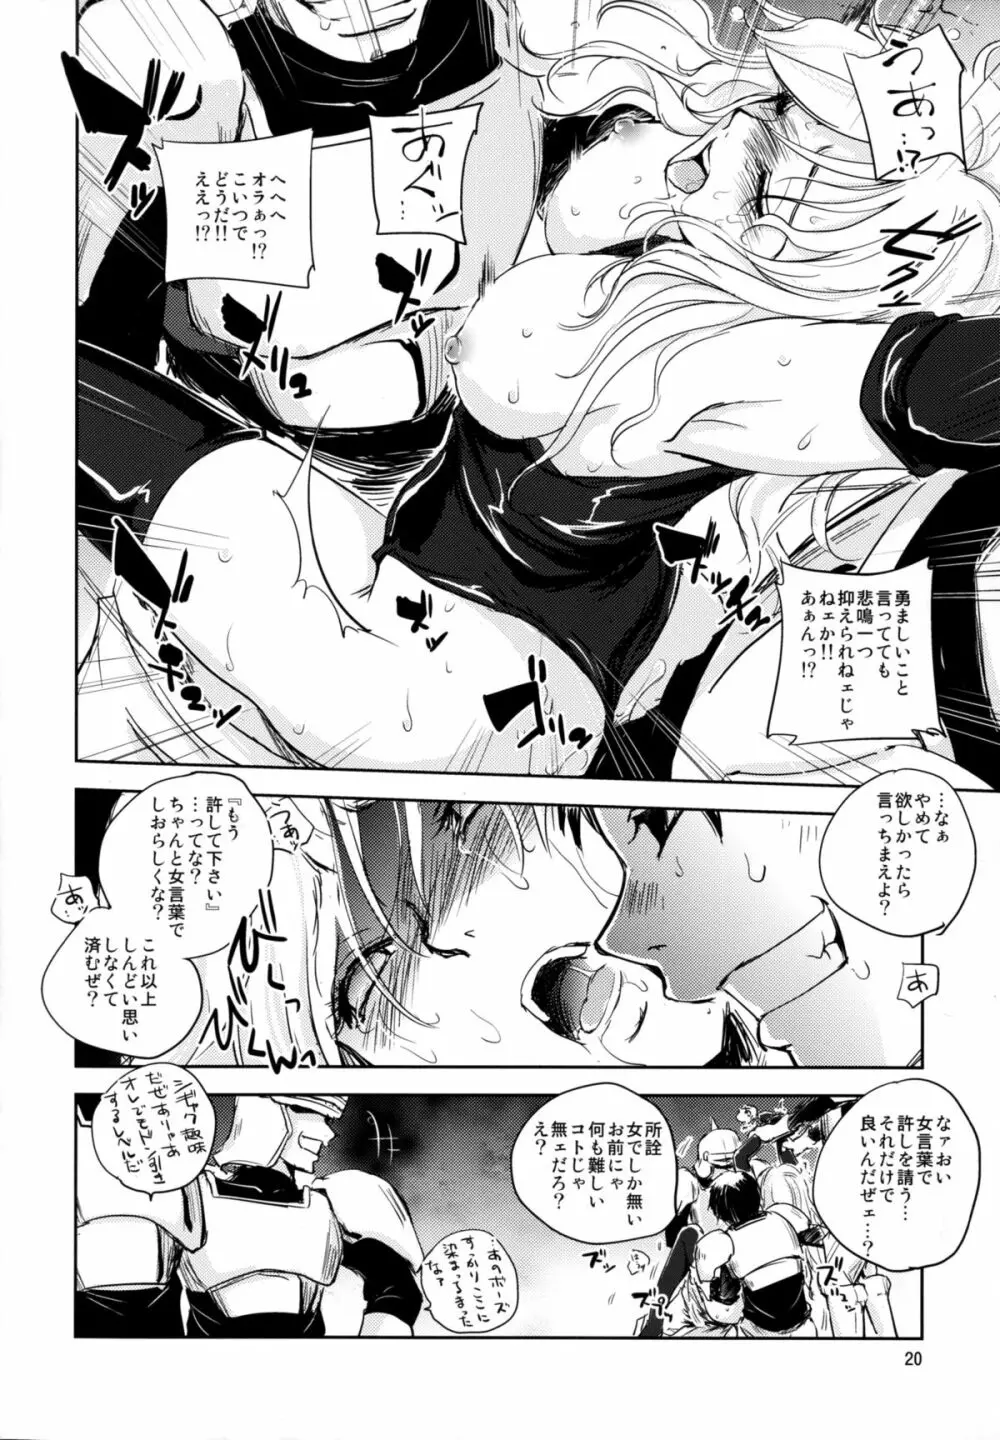 GRASSEN'S WAR ANOTHER STORY Ex #05 ノード侵攻 V Page.20